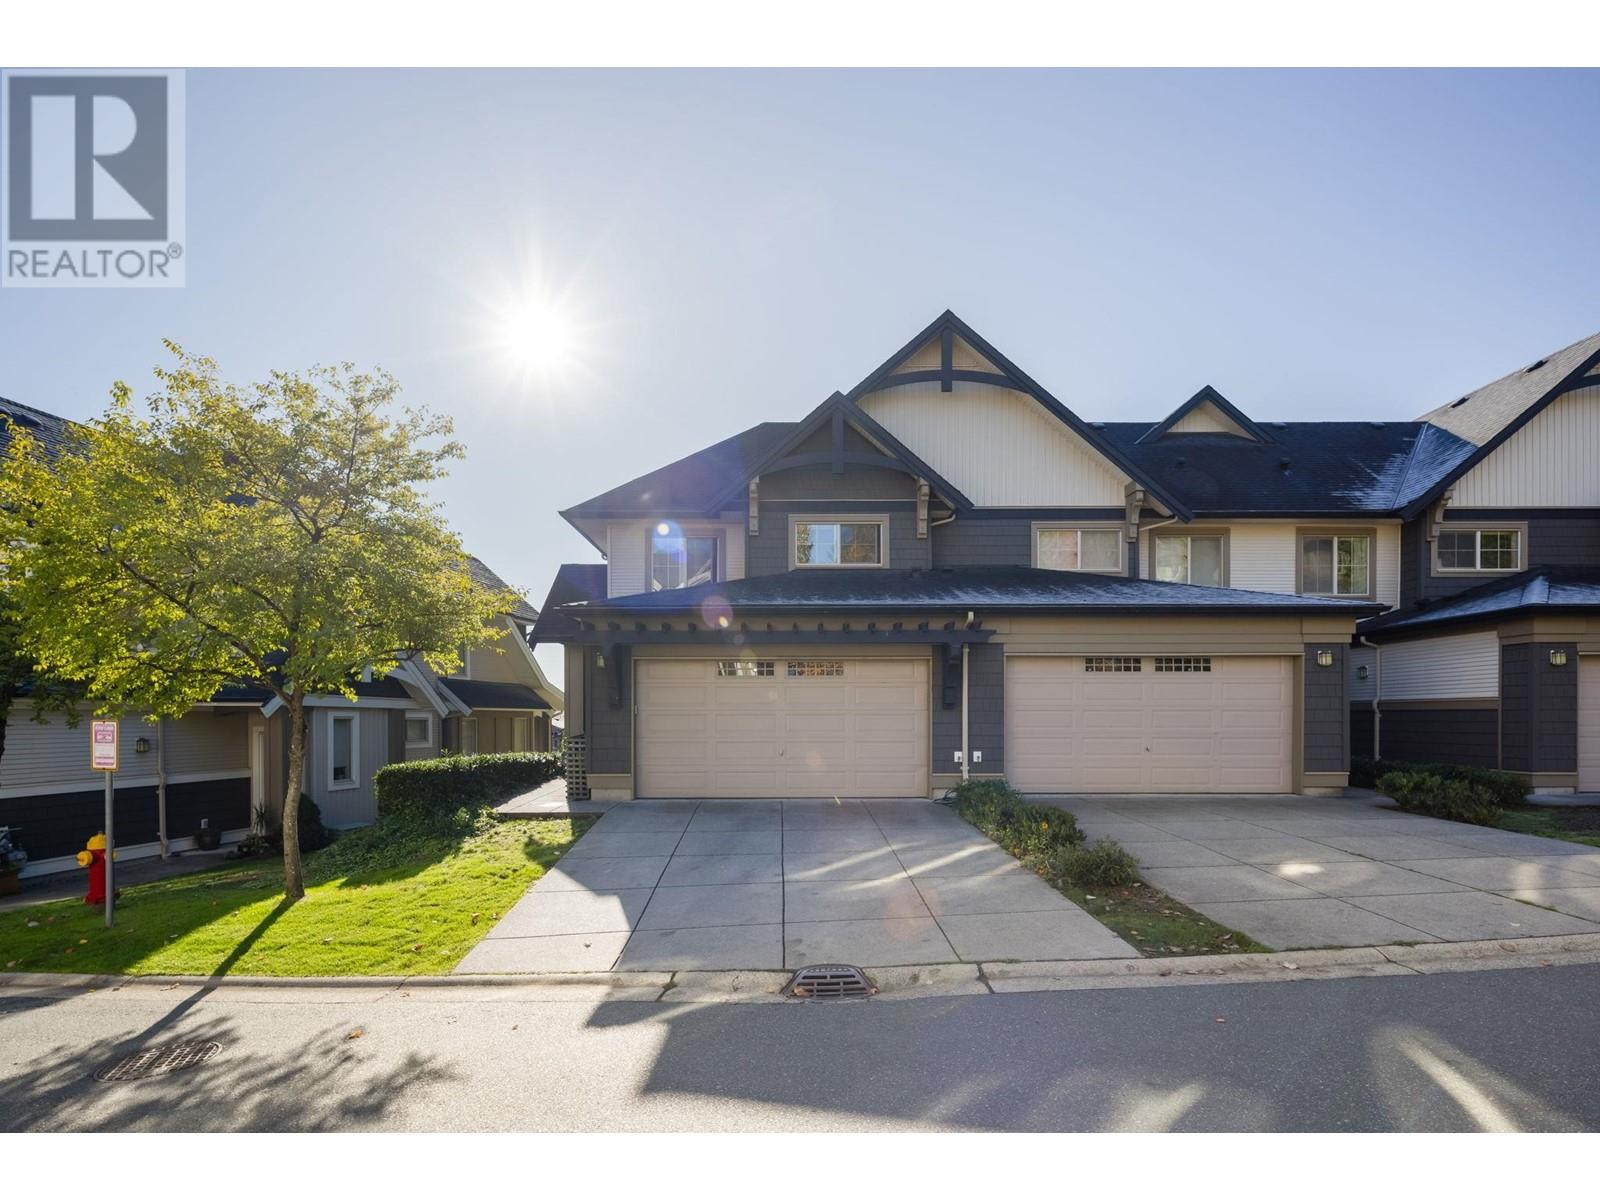 71 1357 PURCELL DRIVE, coquitlam, British Columbia